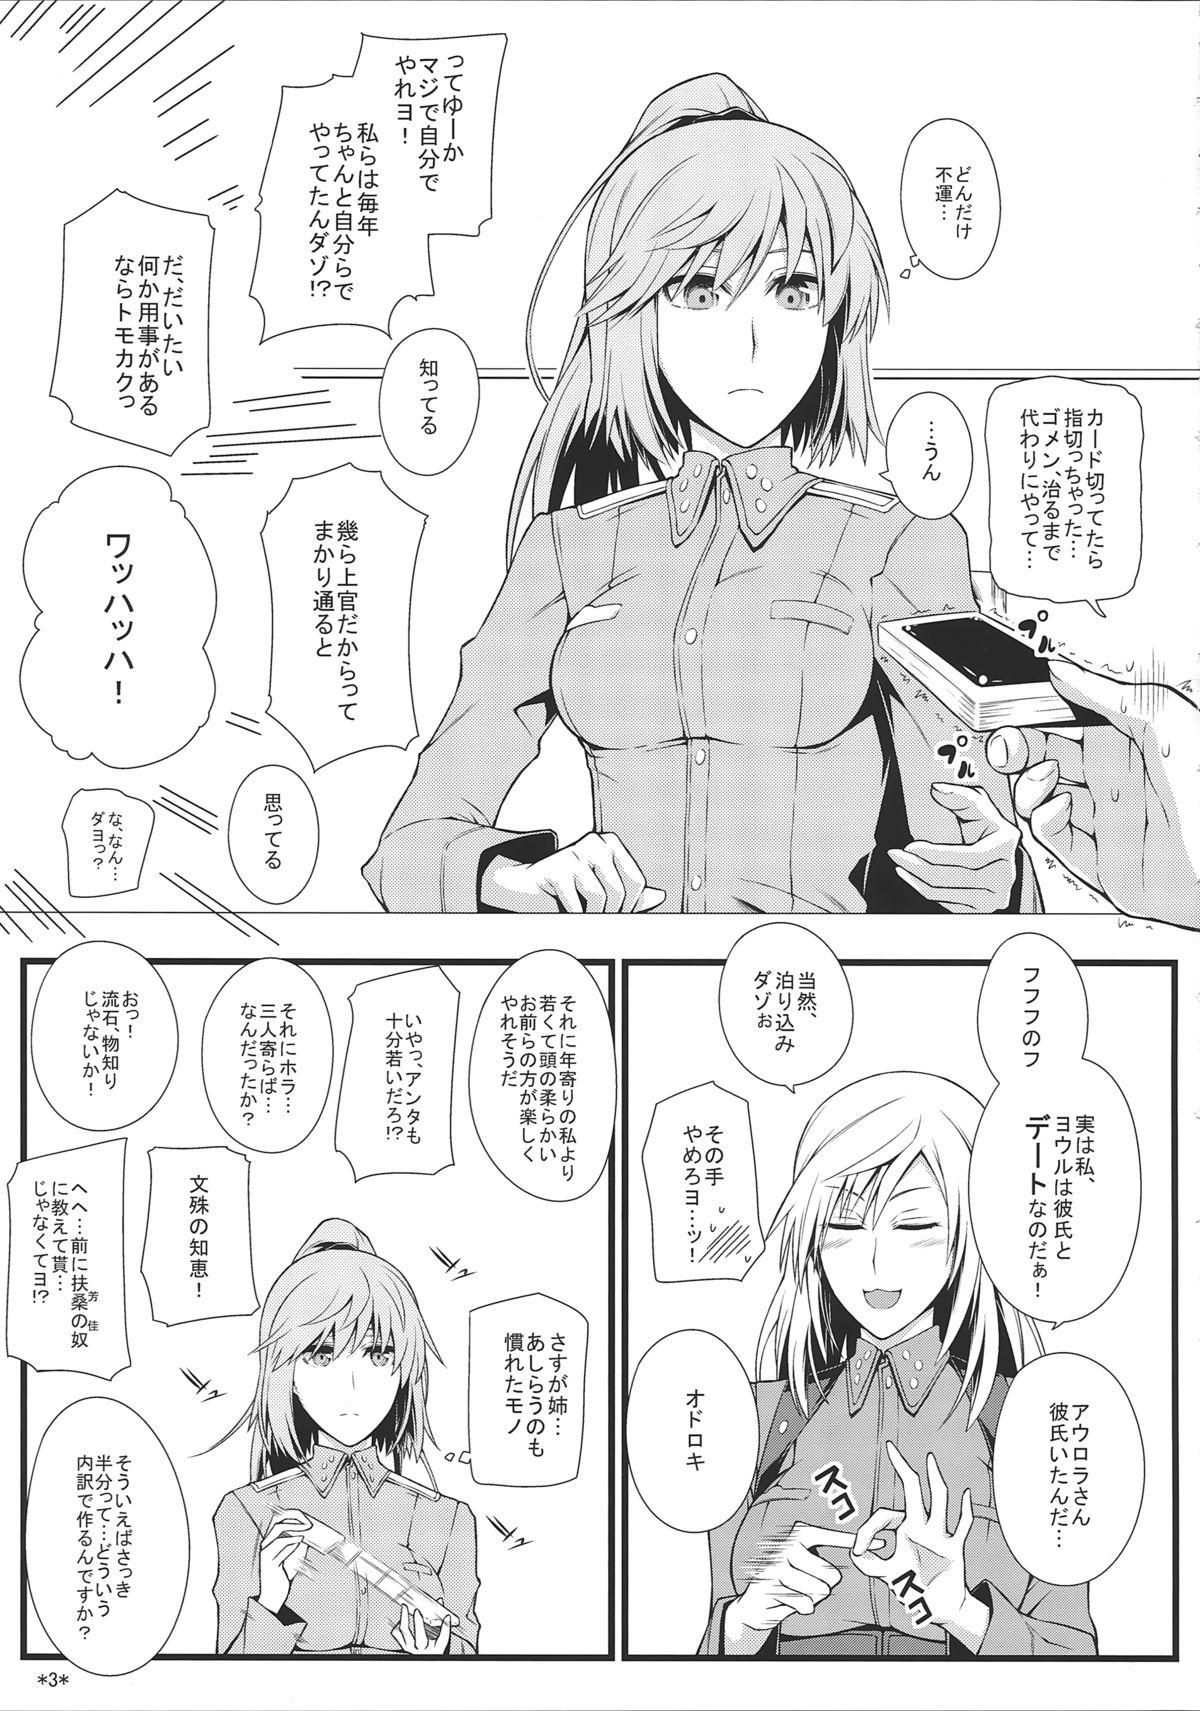 Hardcore Fuck KARLSLAND SYNDROME 3 - Strike witches Mexicano - Page 5